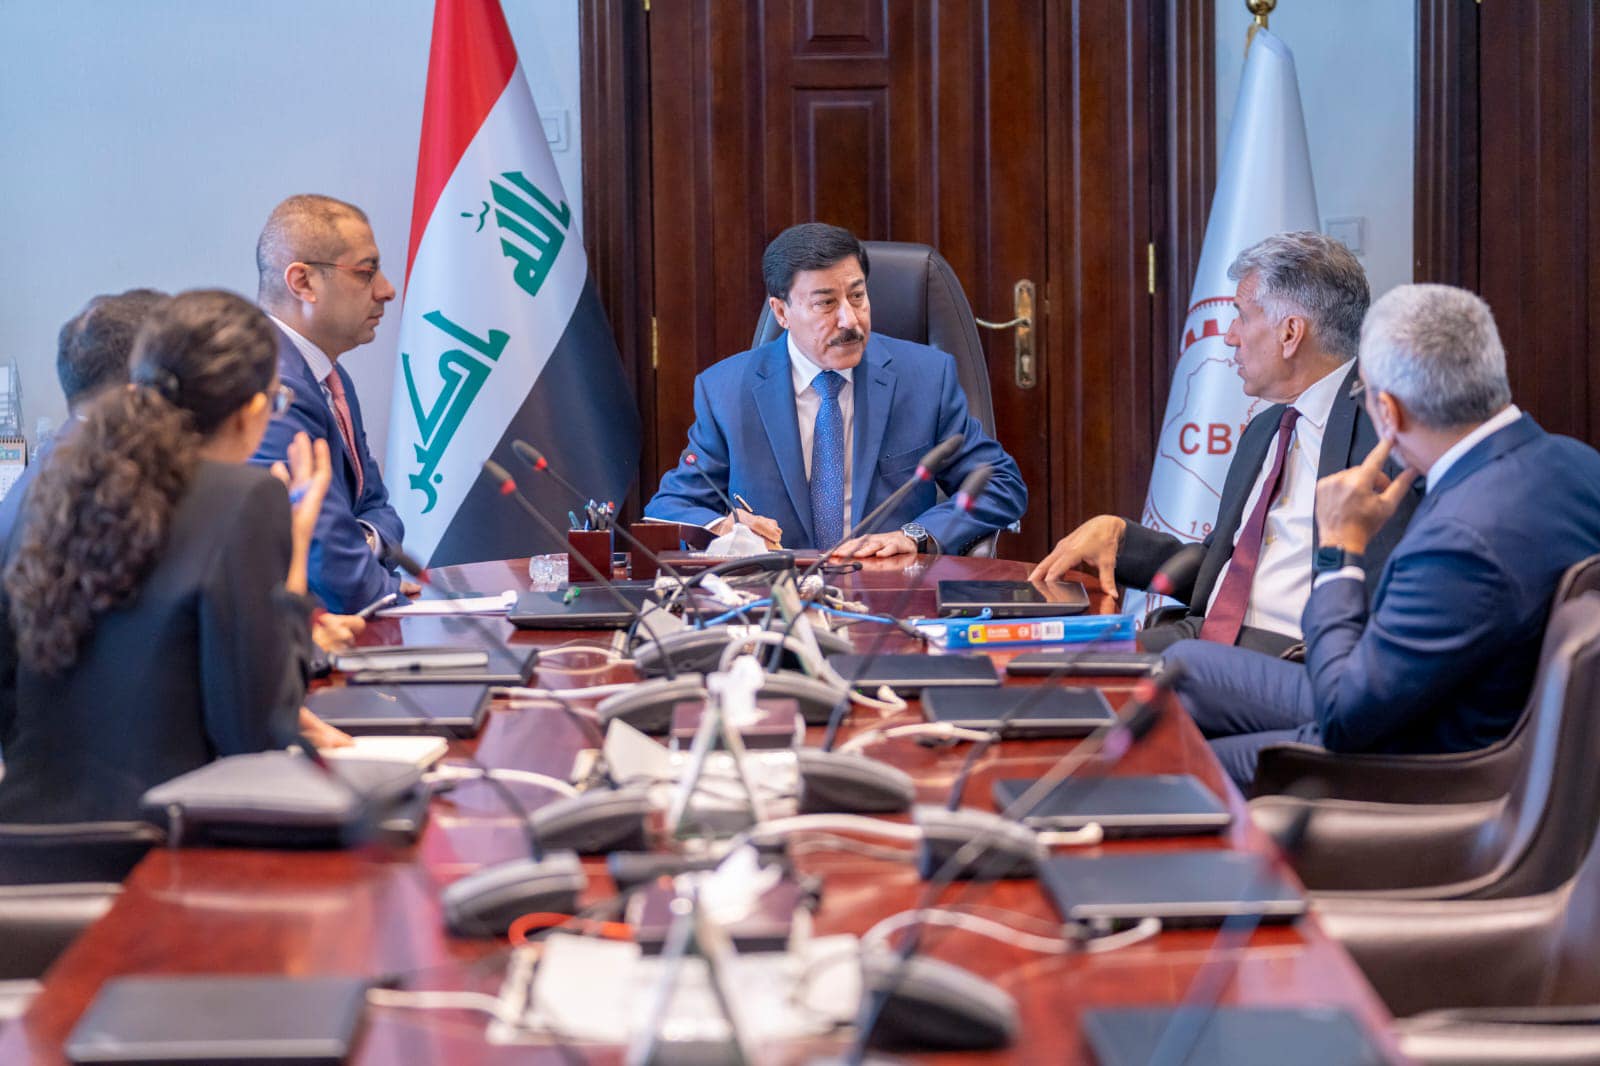 An American bank expresses its willingness to support Iraqi banks with foreign trade financing operations in dollars